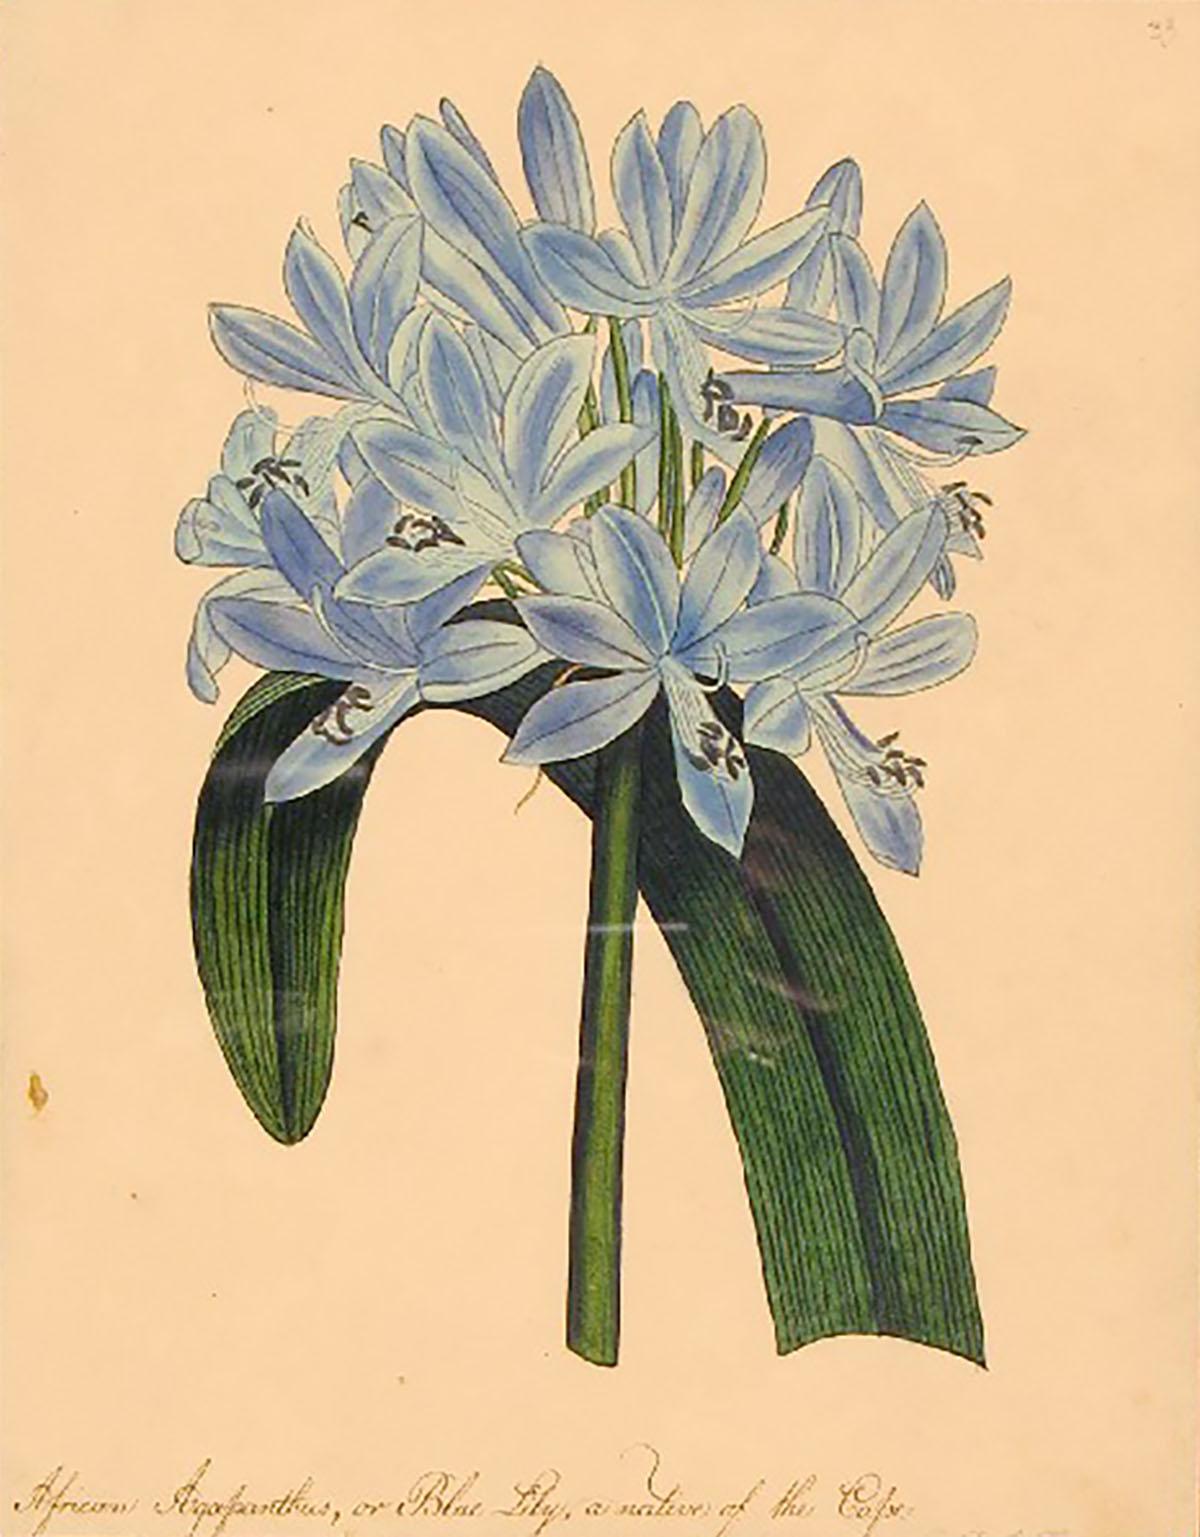 African Agapanthus, or Blue Lily, a native of the Cape